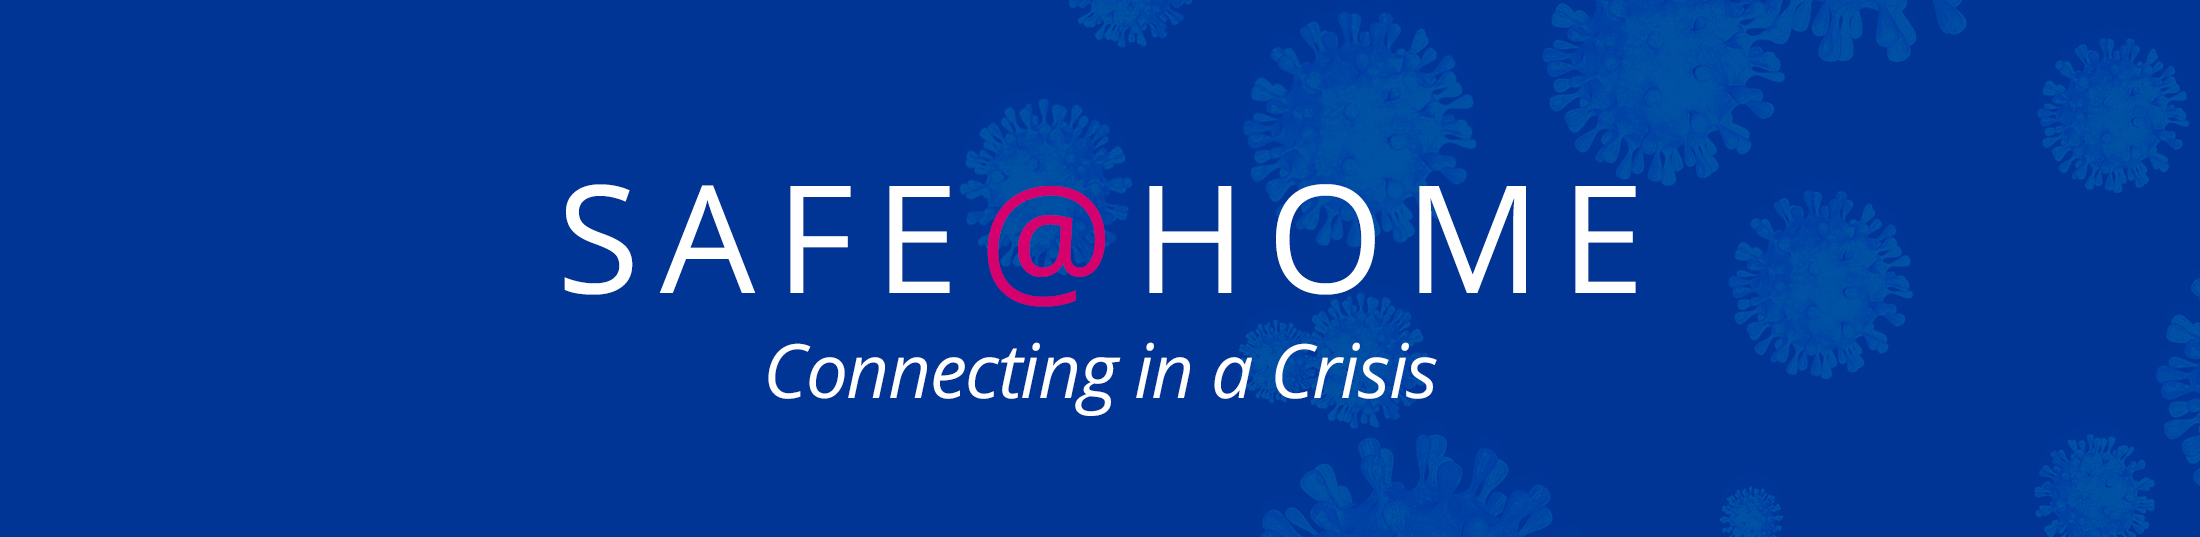 Safe at Home: Connecting in a Crisis